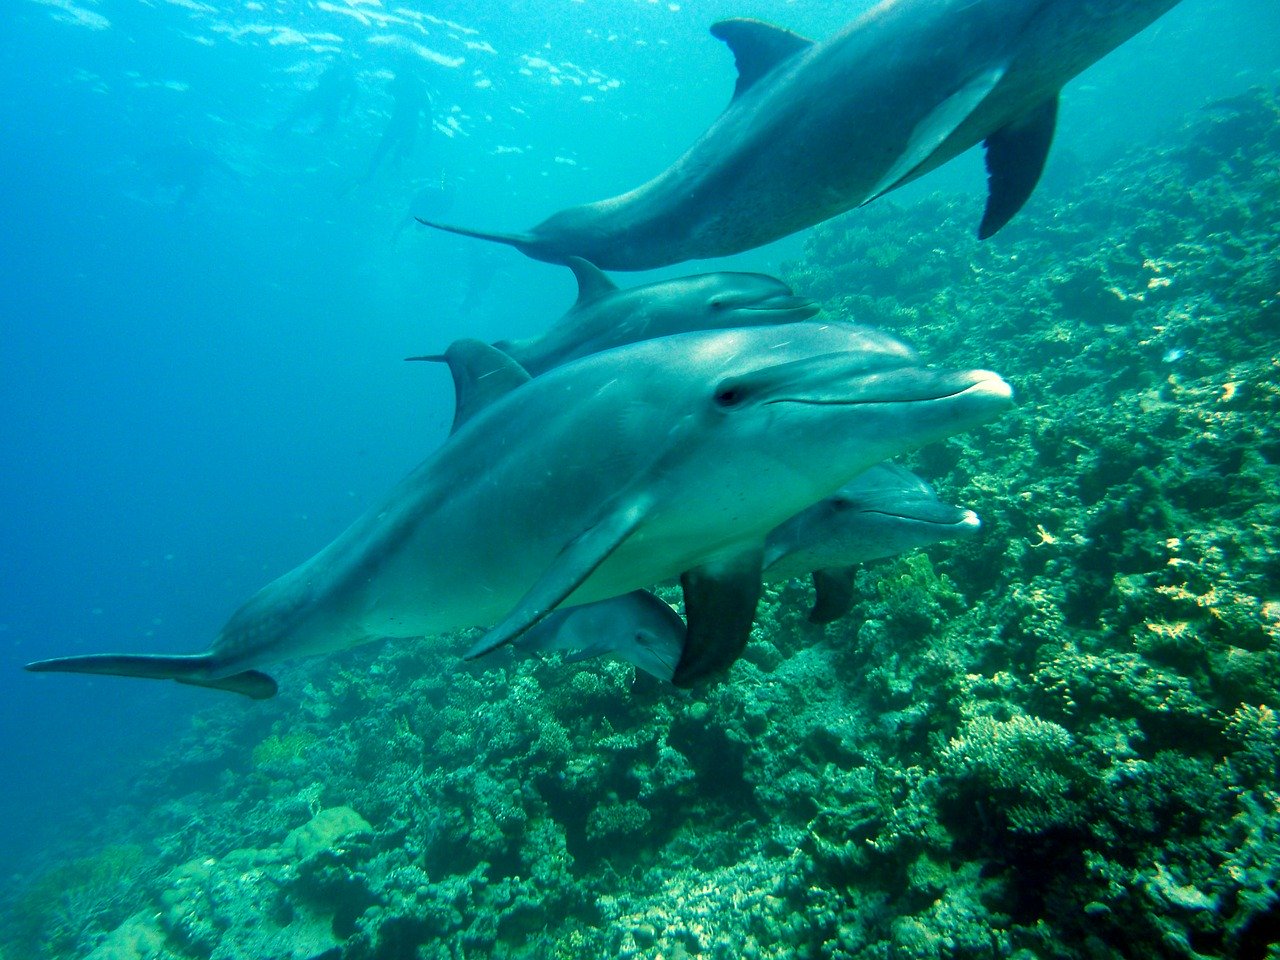 Family of Dolphins, plight of dolphins